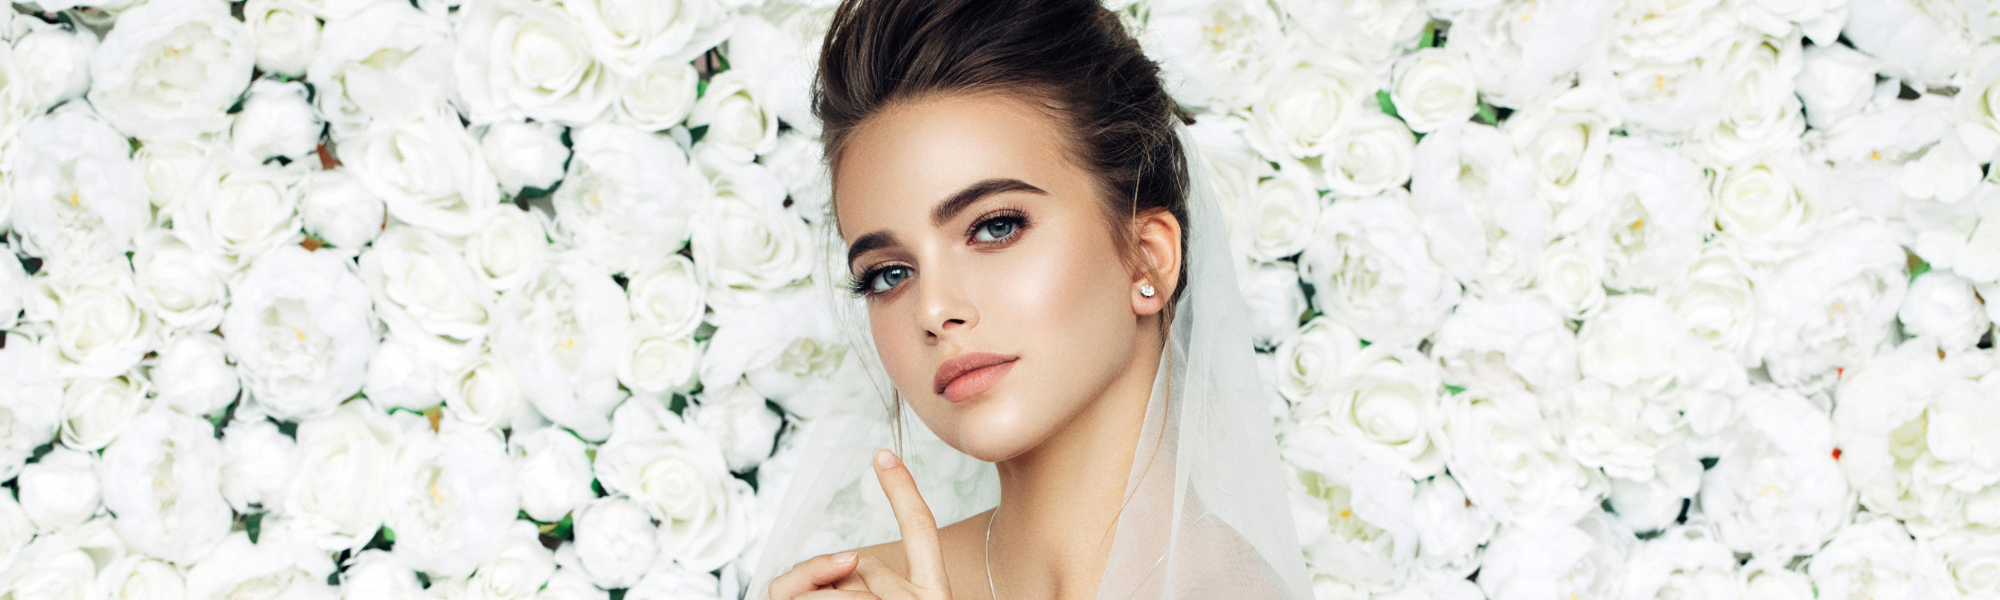 Guide and timeline to healthy and beautiful skin on your wedding day by Illume Cosmetic MedSpa